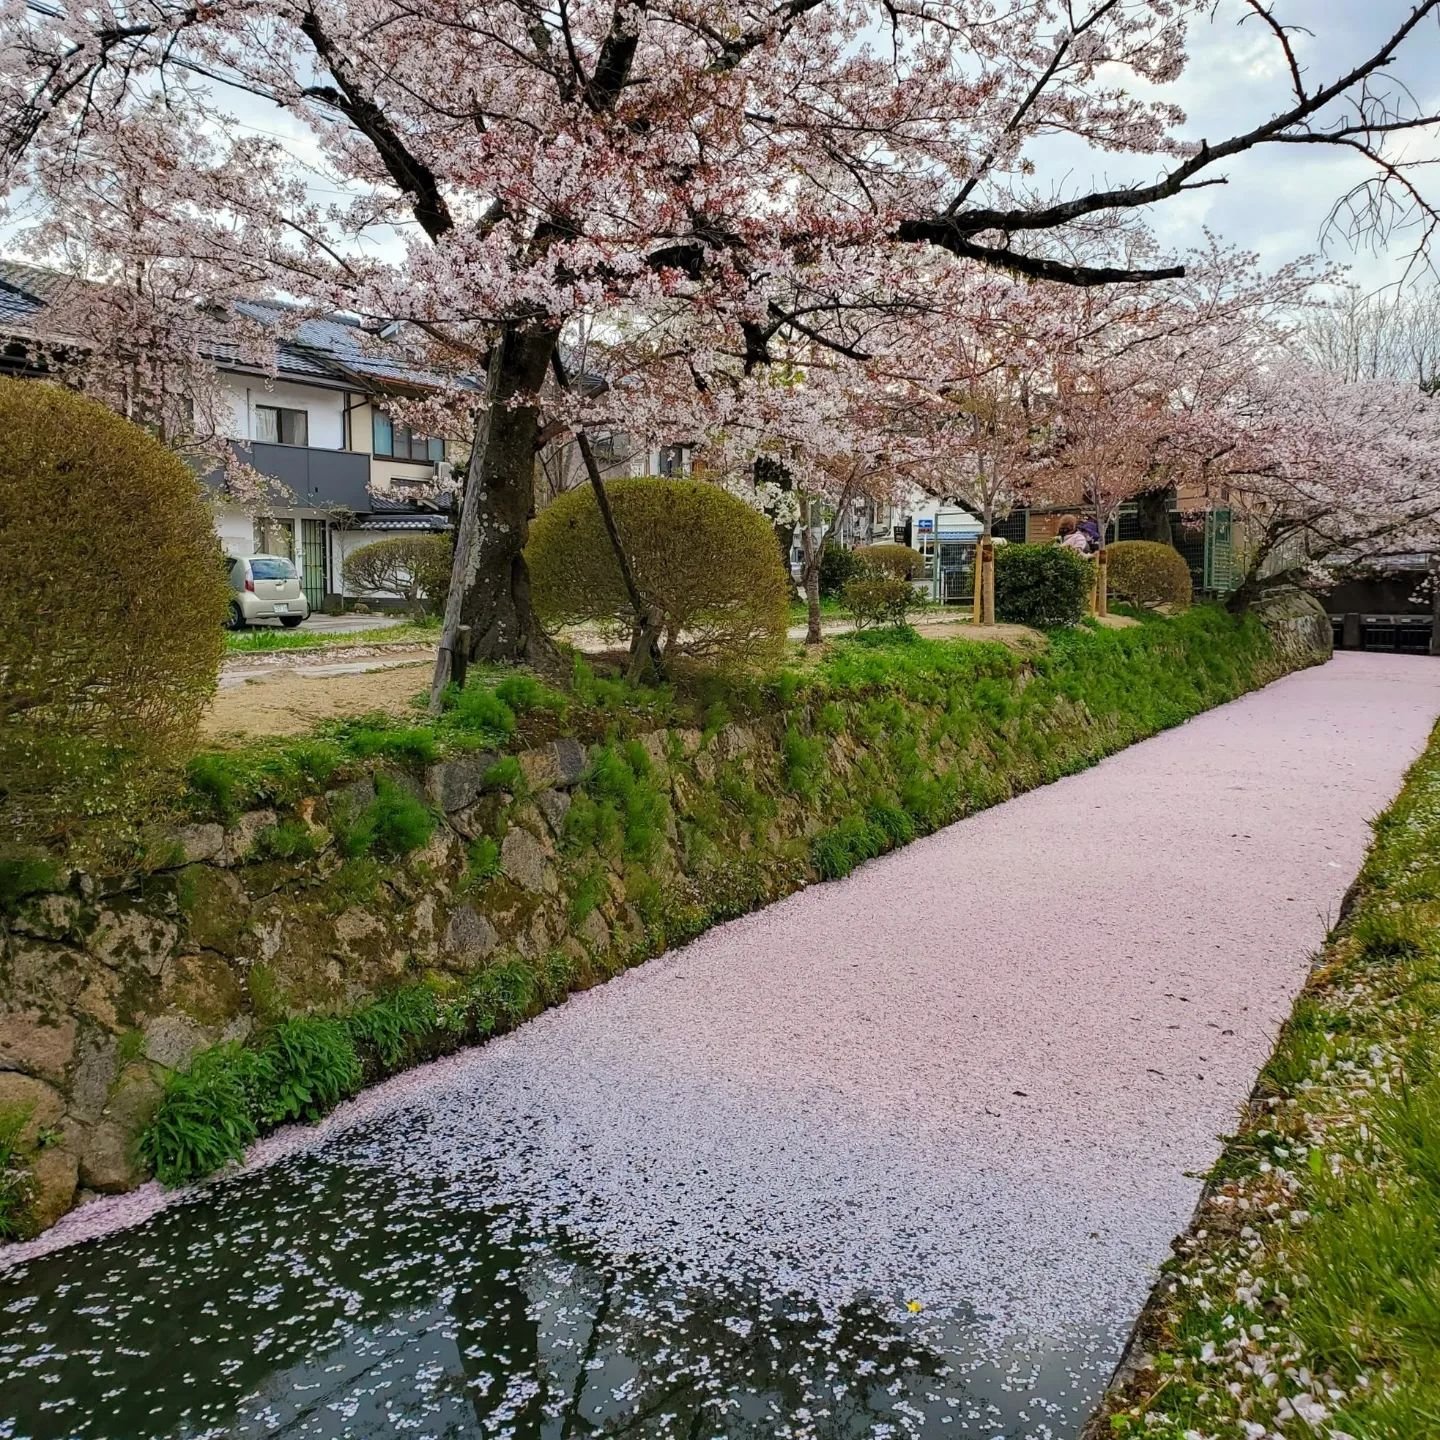 Towards the middle of April parts of the canal beside the Philosopher's Path (哲学の道) and the Takase-gawa become a river of petals.

The phrases 'hana-no-ukibashi' (花の浮橋 'floating bridge of flowers') and 'hanaikada' (花筏 'flower raft') both describe wat